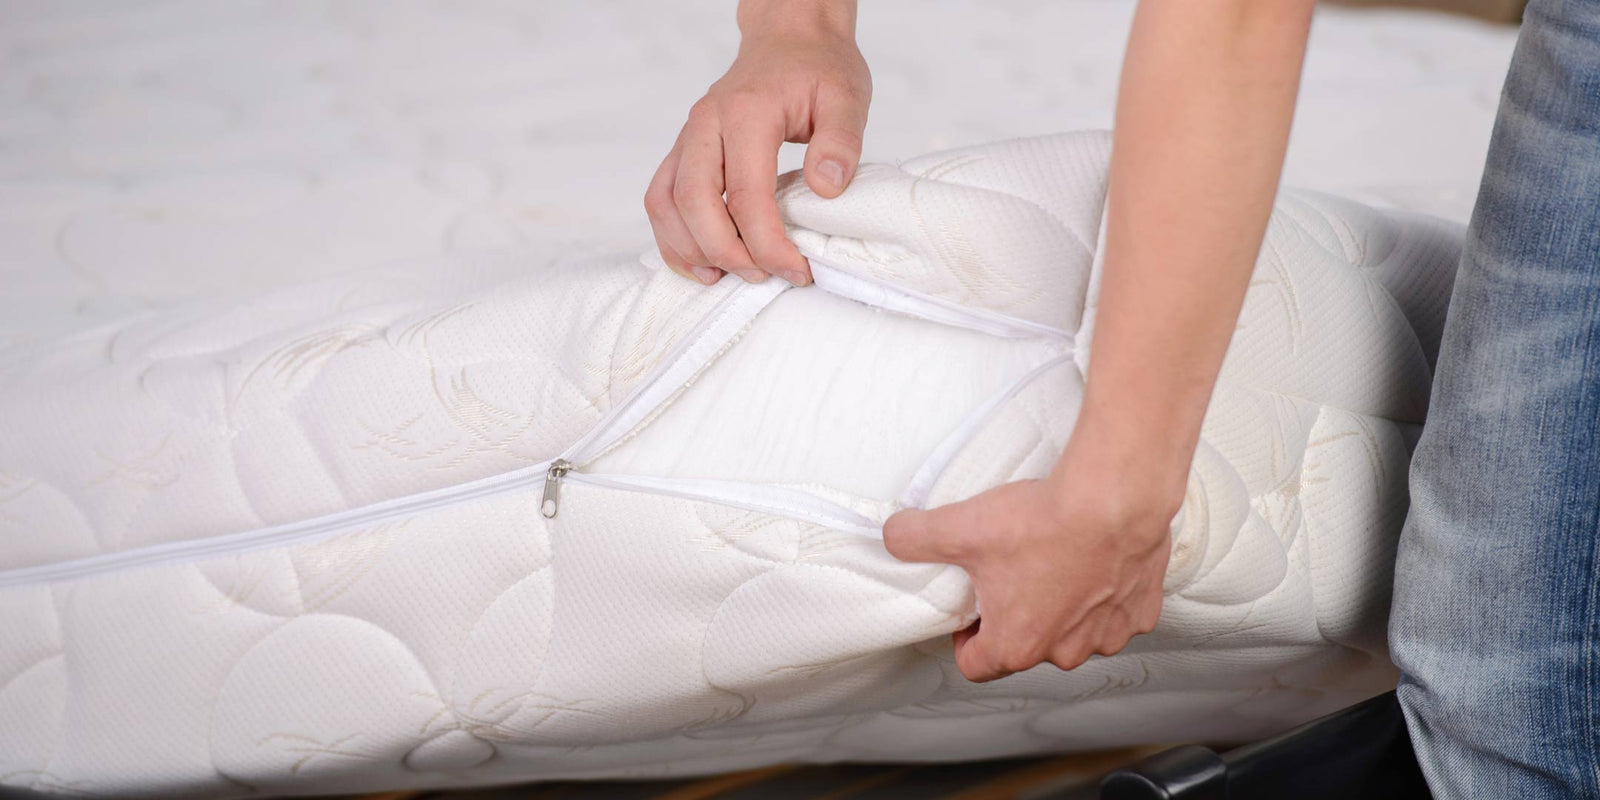 How to Wash Your Mattress Cover the Right Way - CNET